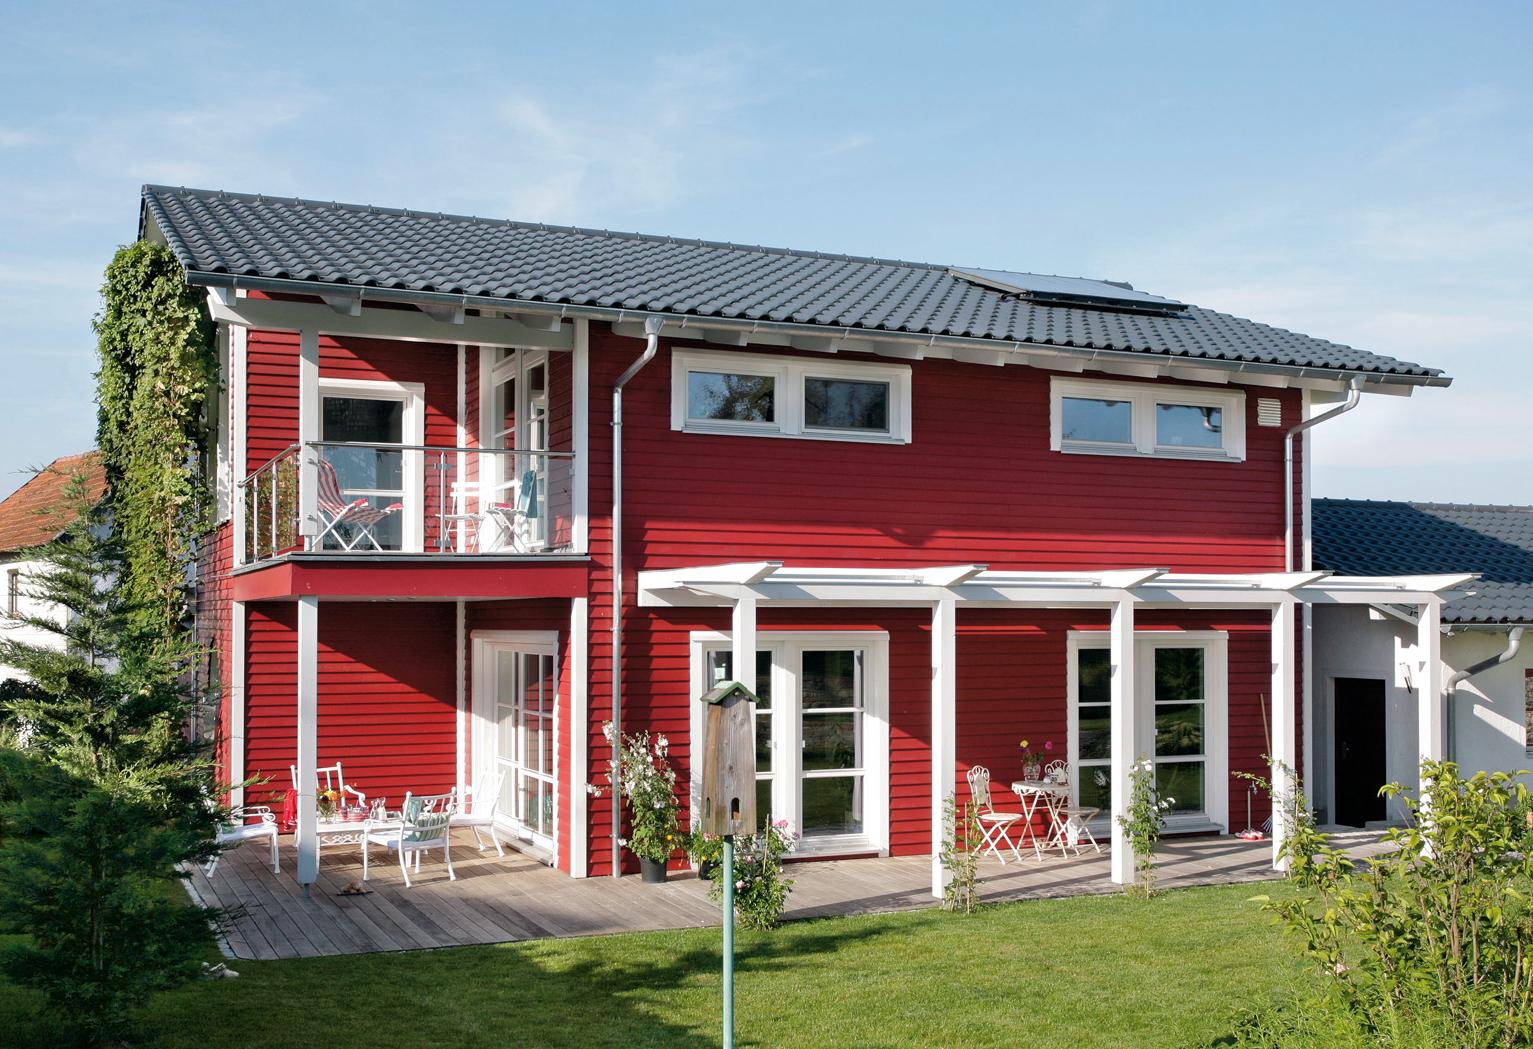 Detached house with red wooden facade in country style